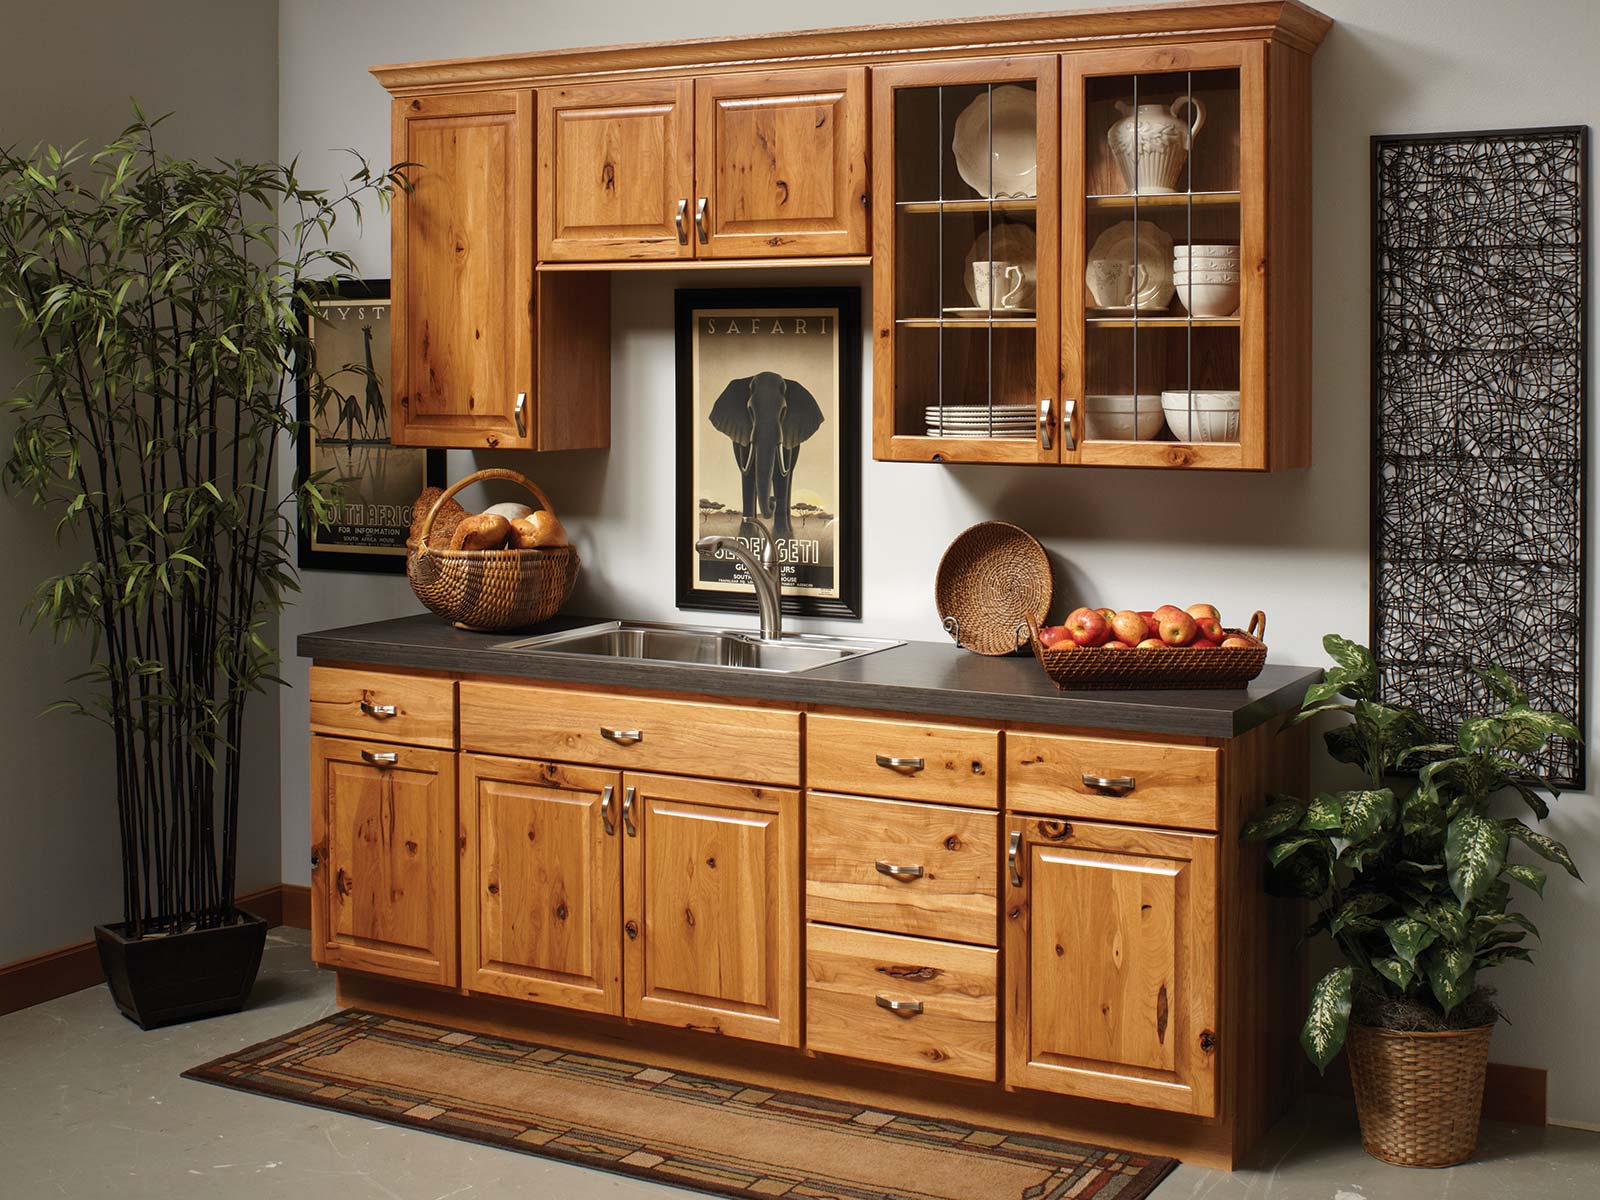 Rustic kitchenette with hickory kitchen cabinets.